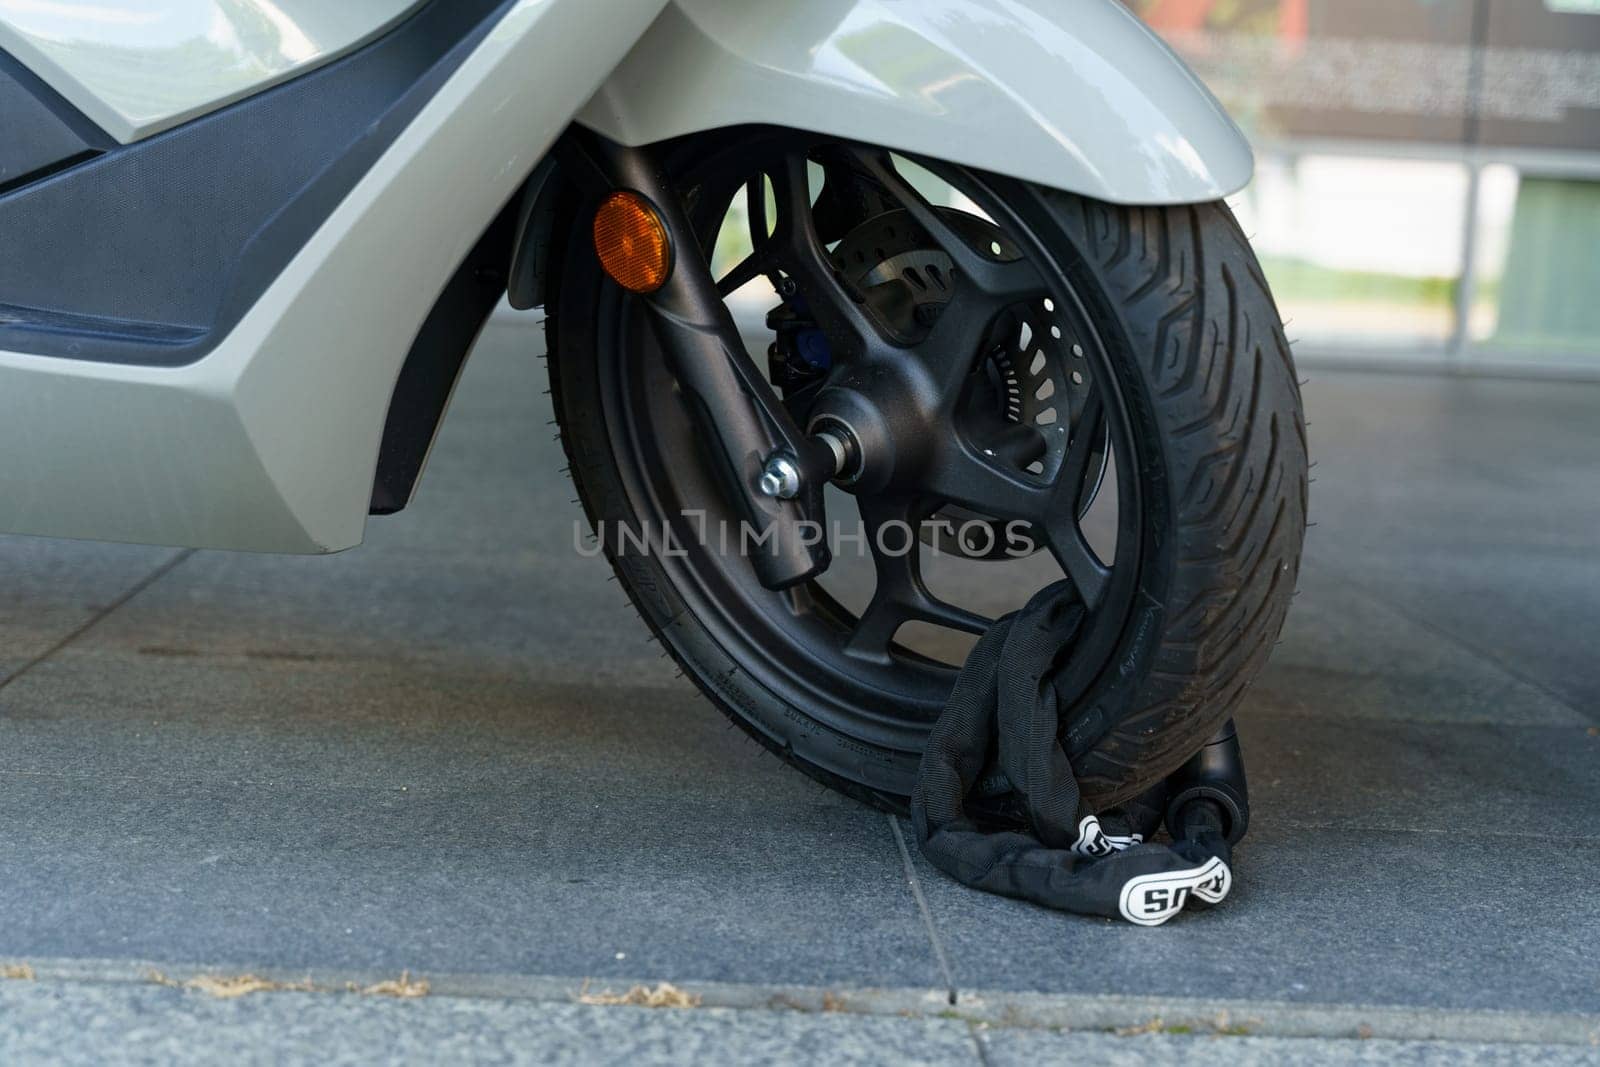 A motorcycle attached to a tire with a lock, potentially for towing or transport purposes. by Sd28DimoN_1976